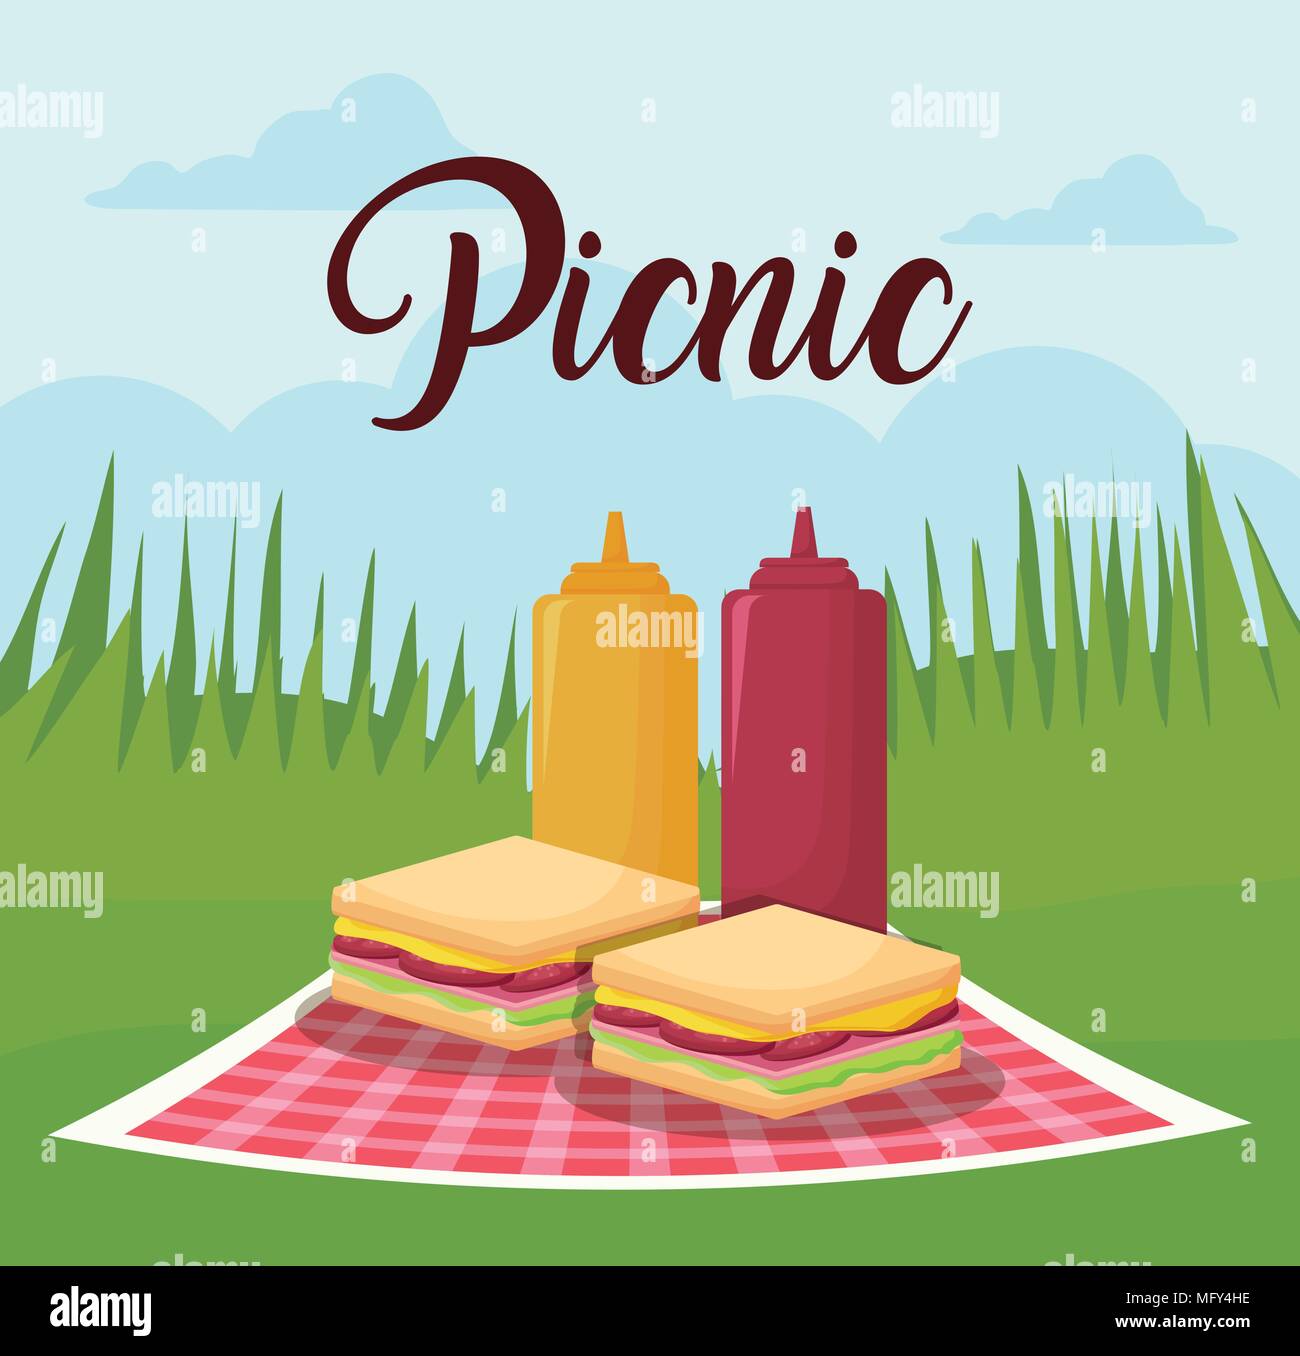 picnic landscape concept with sandwichs and sauce bottles, colorful design. vector illustration Stock Vector